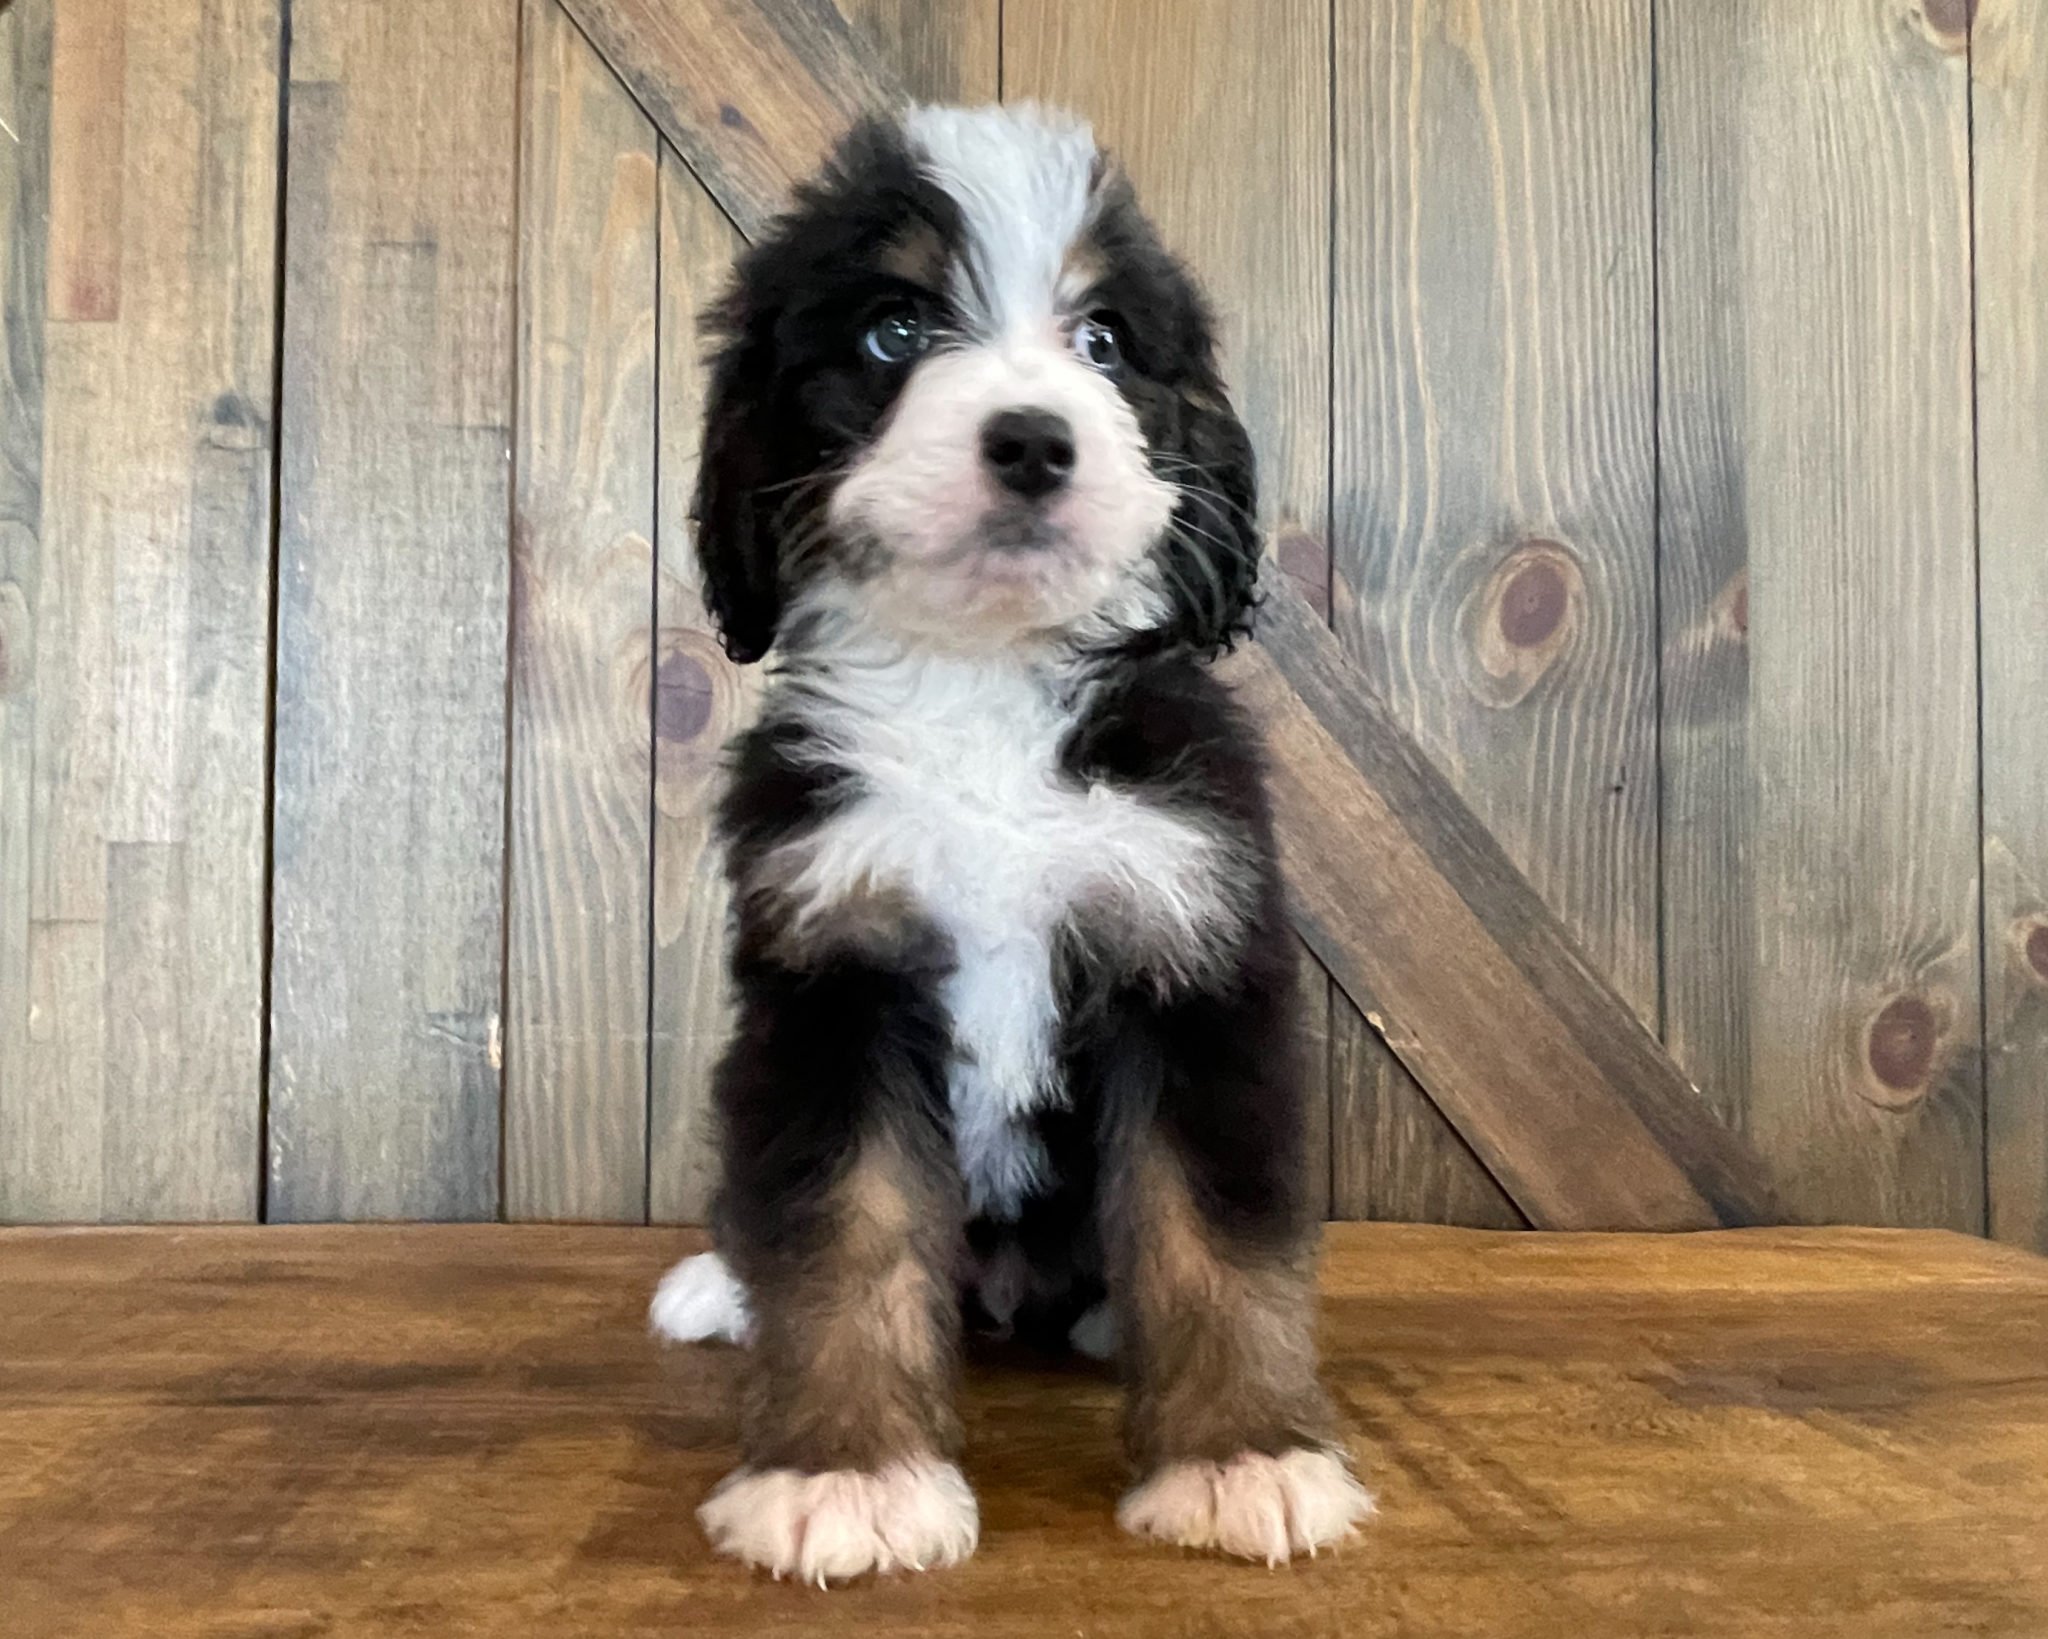 A litter of Standard Bernedoodles raised in Iowa by Poodles 2 Doodles